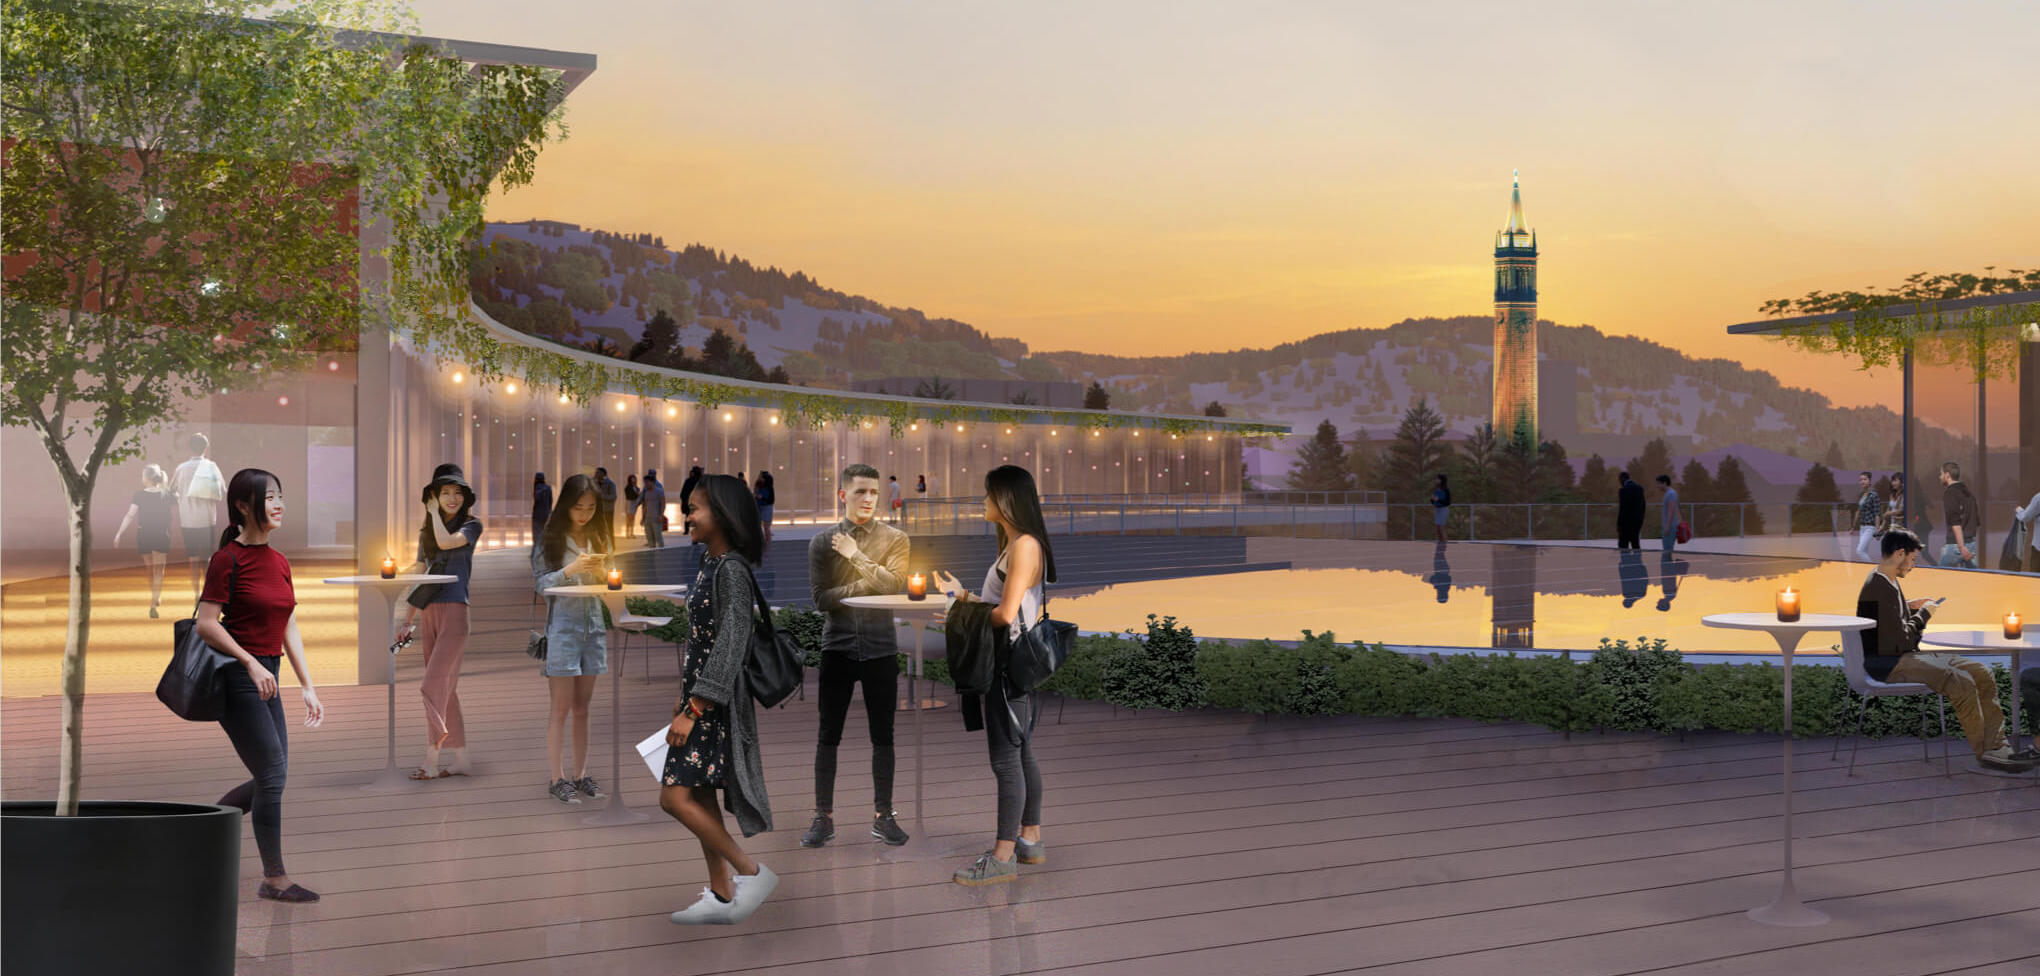 Conceptual illustration of the Gateway building with students walking around the outdoor section